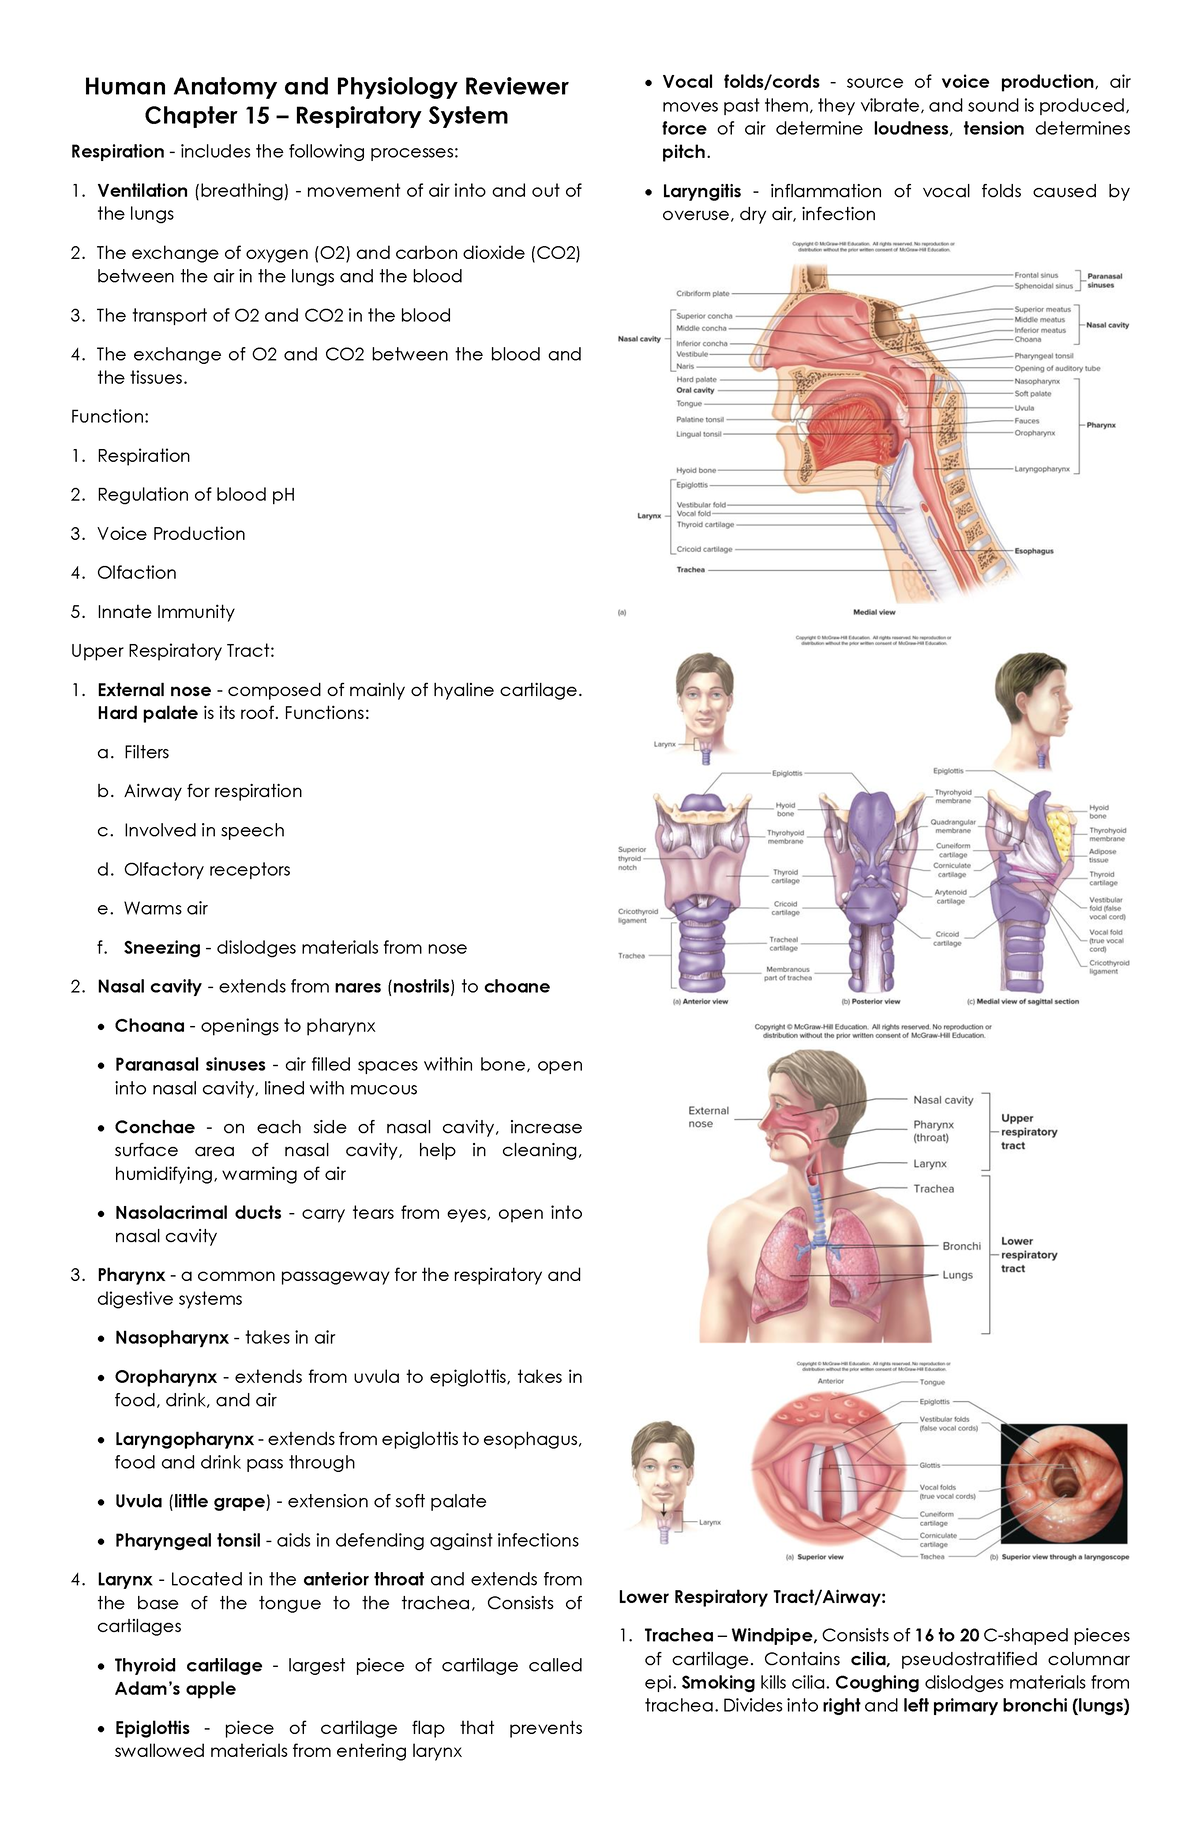 Transes U15 Respiratory System - Human Anatomy and Physiology Reviewer ...